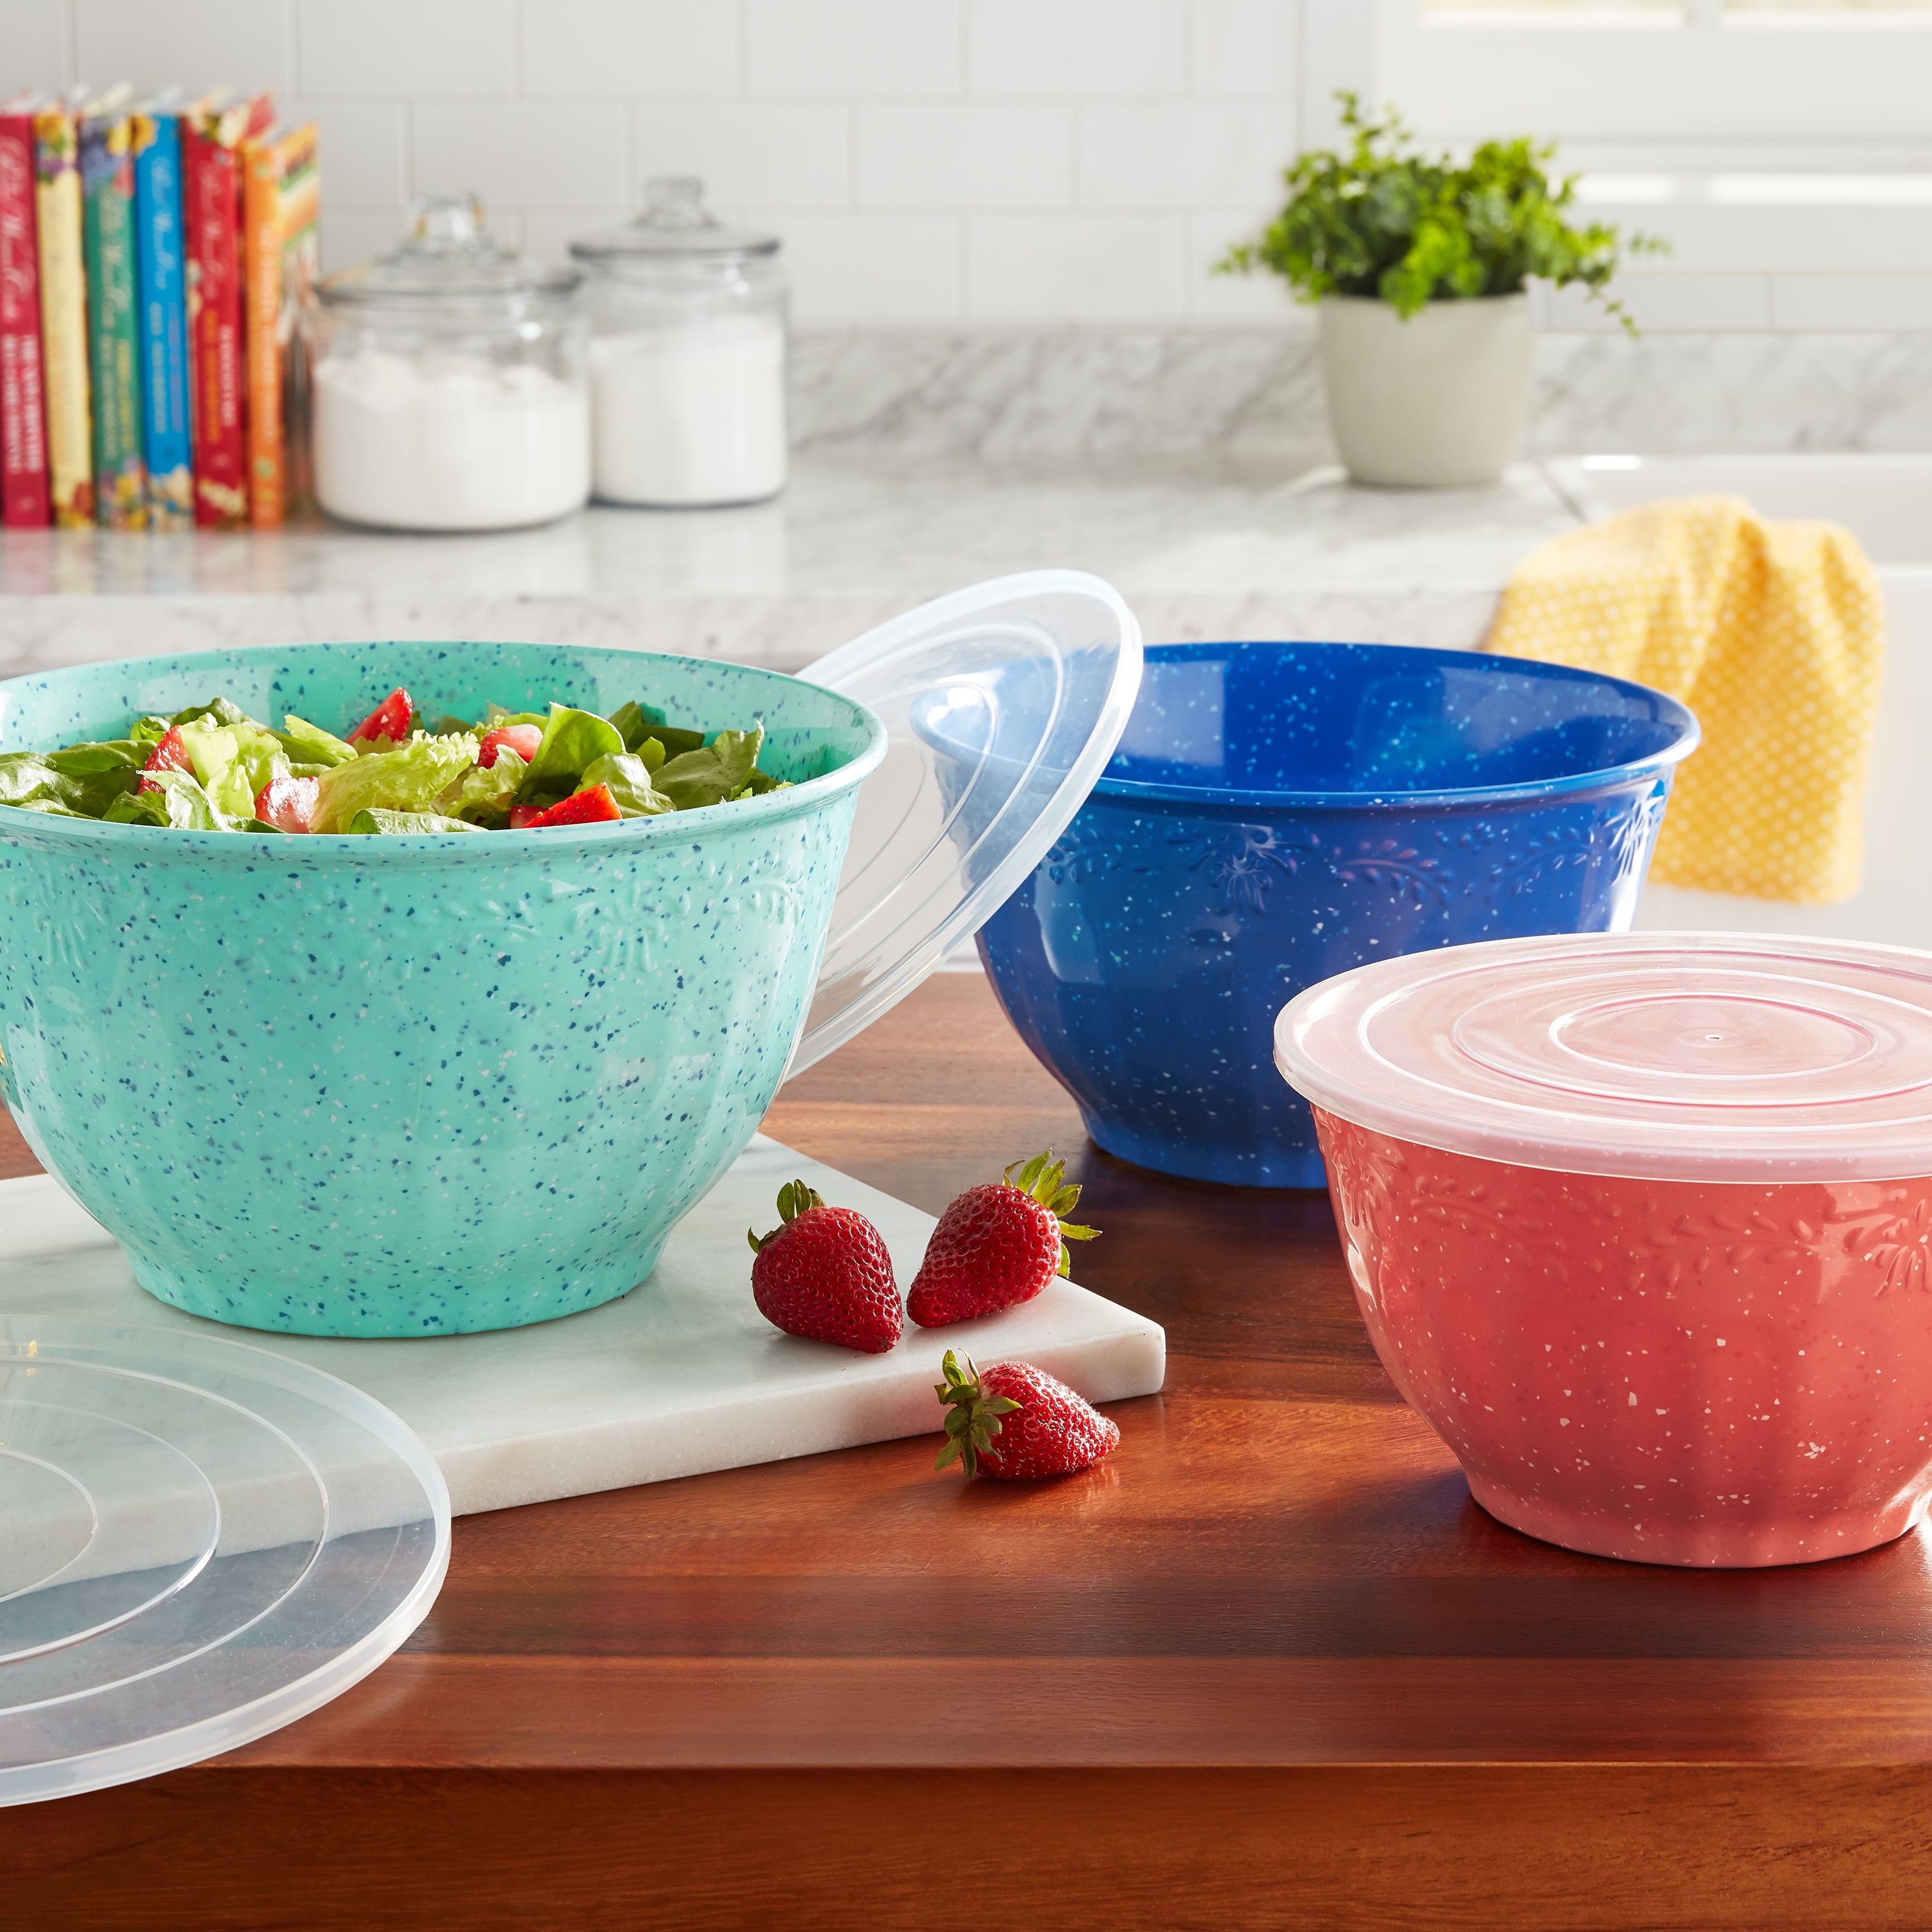 LEXI HOME 6-Piece Melamine Plastic Bright Multicolored Mixing Bowls Set  MW1416 - The Home Depot